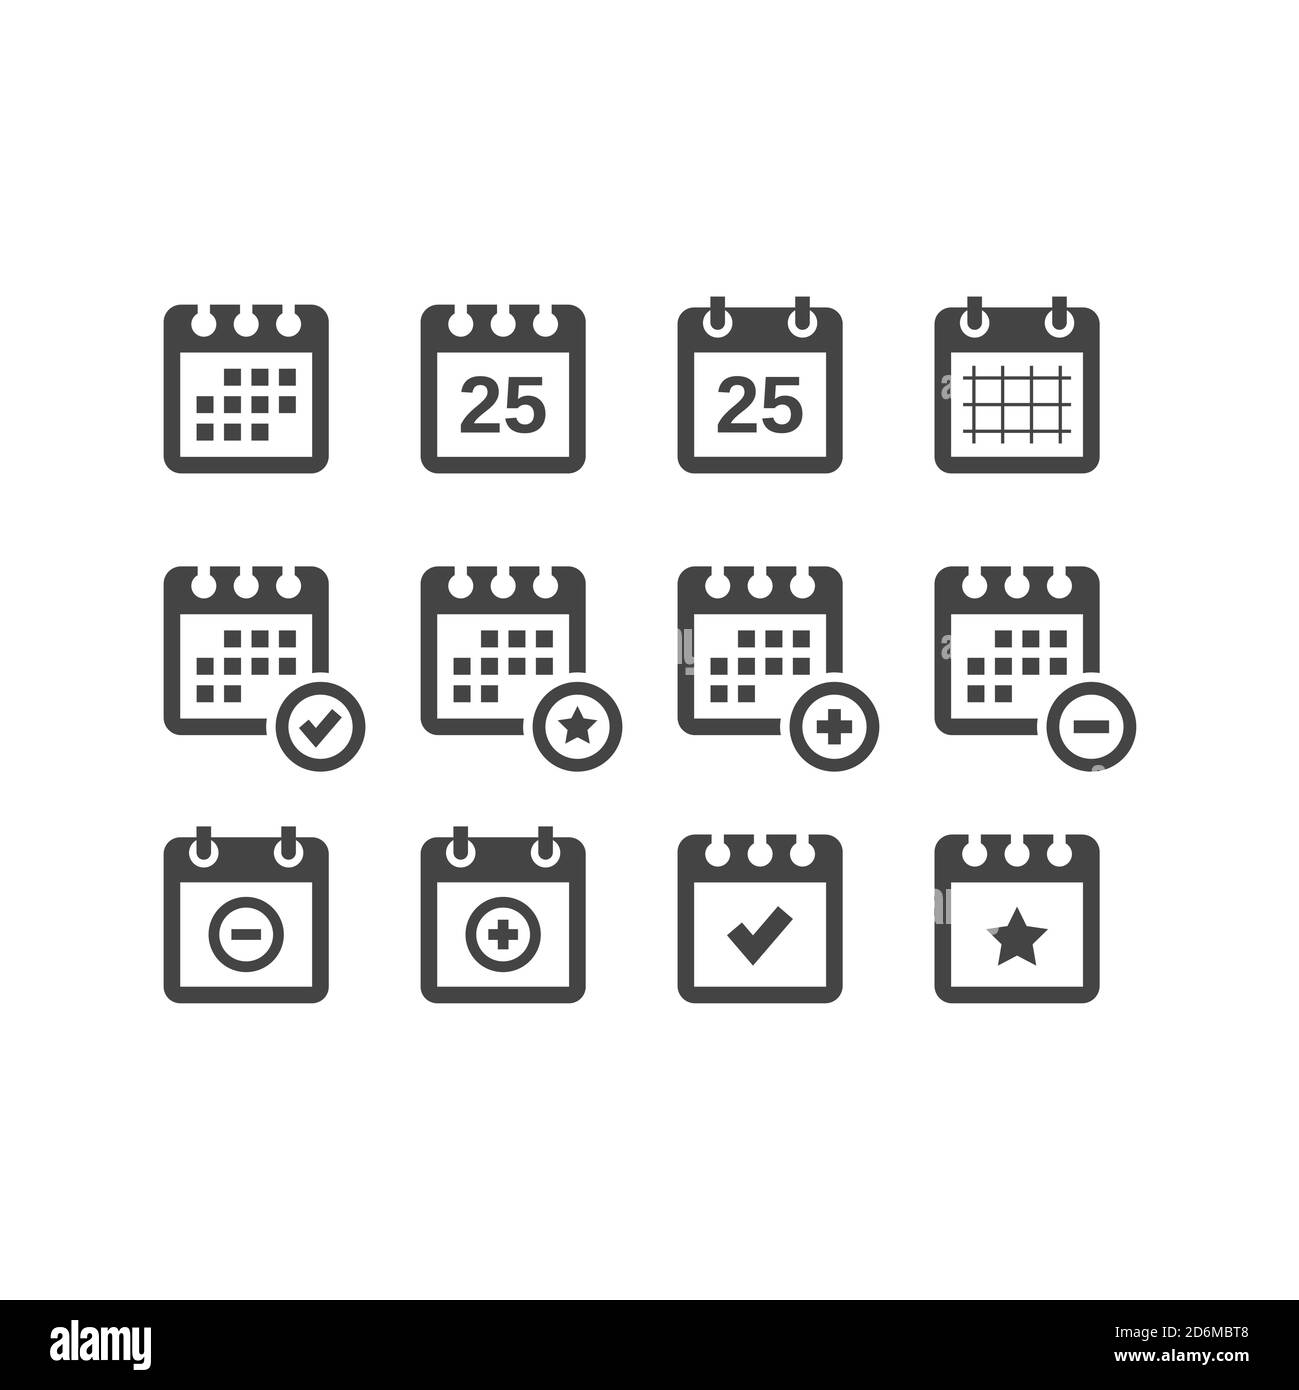 Calendar black vector icon set. Calender with date, star, plus and minus sign glyph icons. Stock Vector